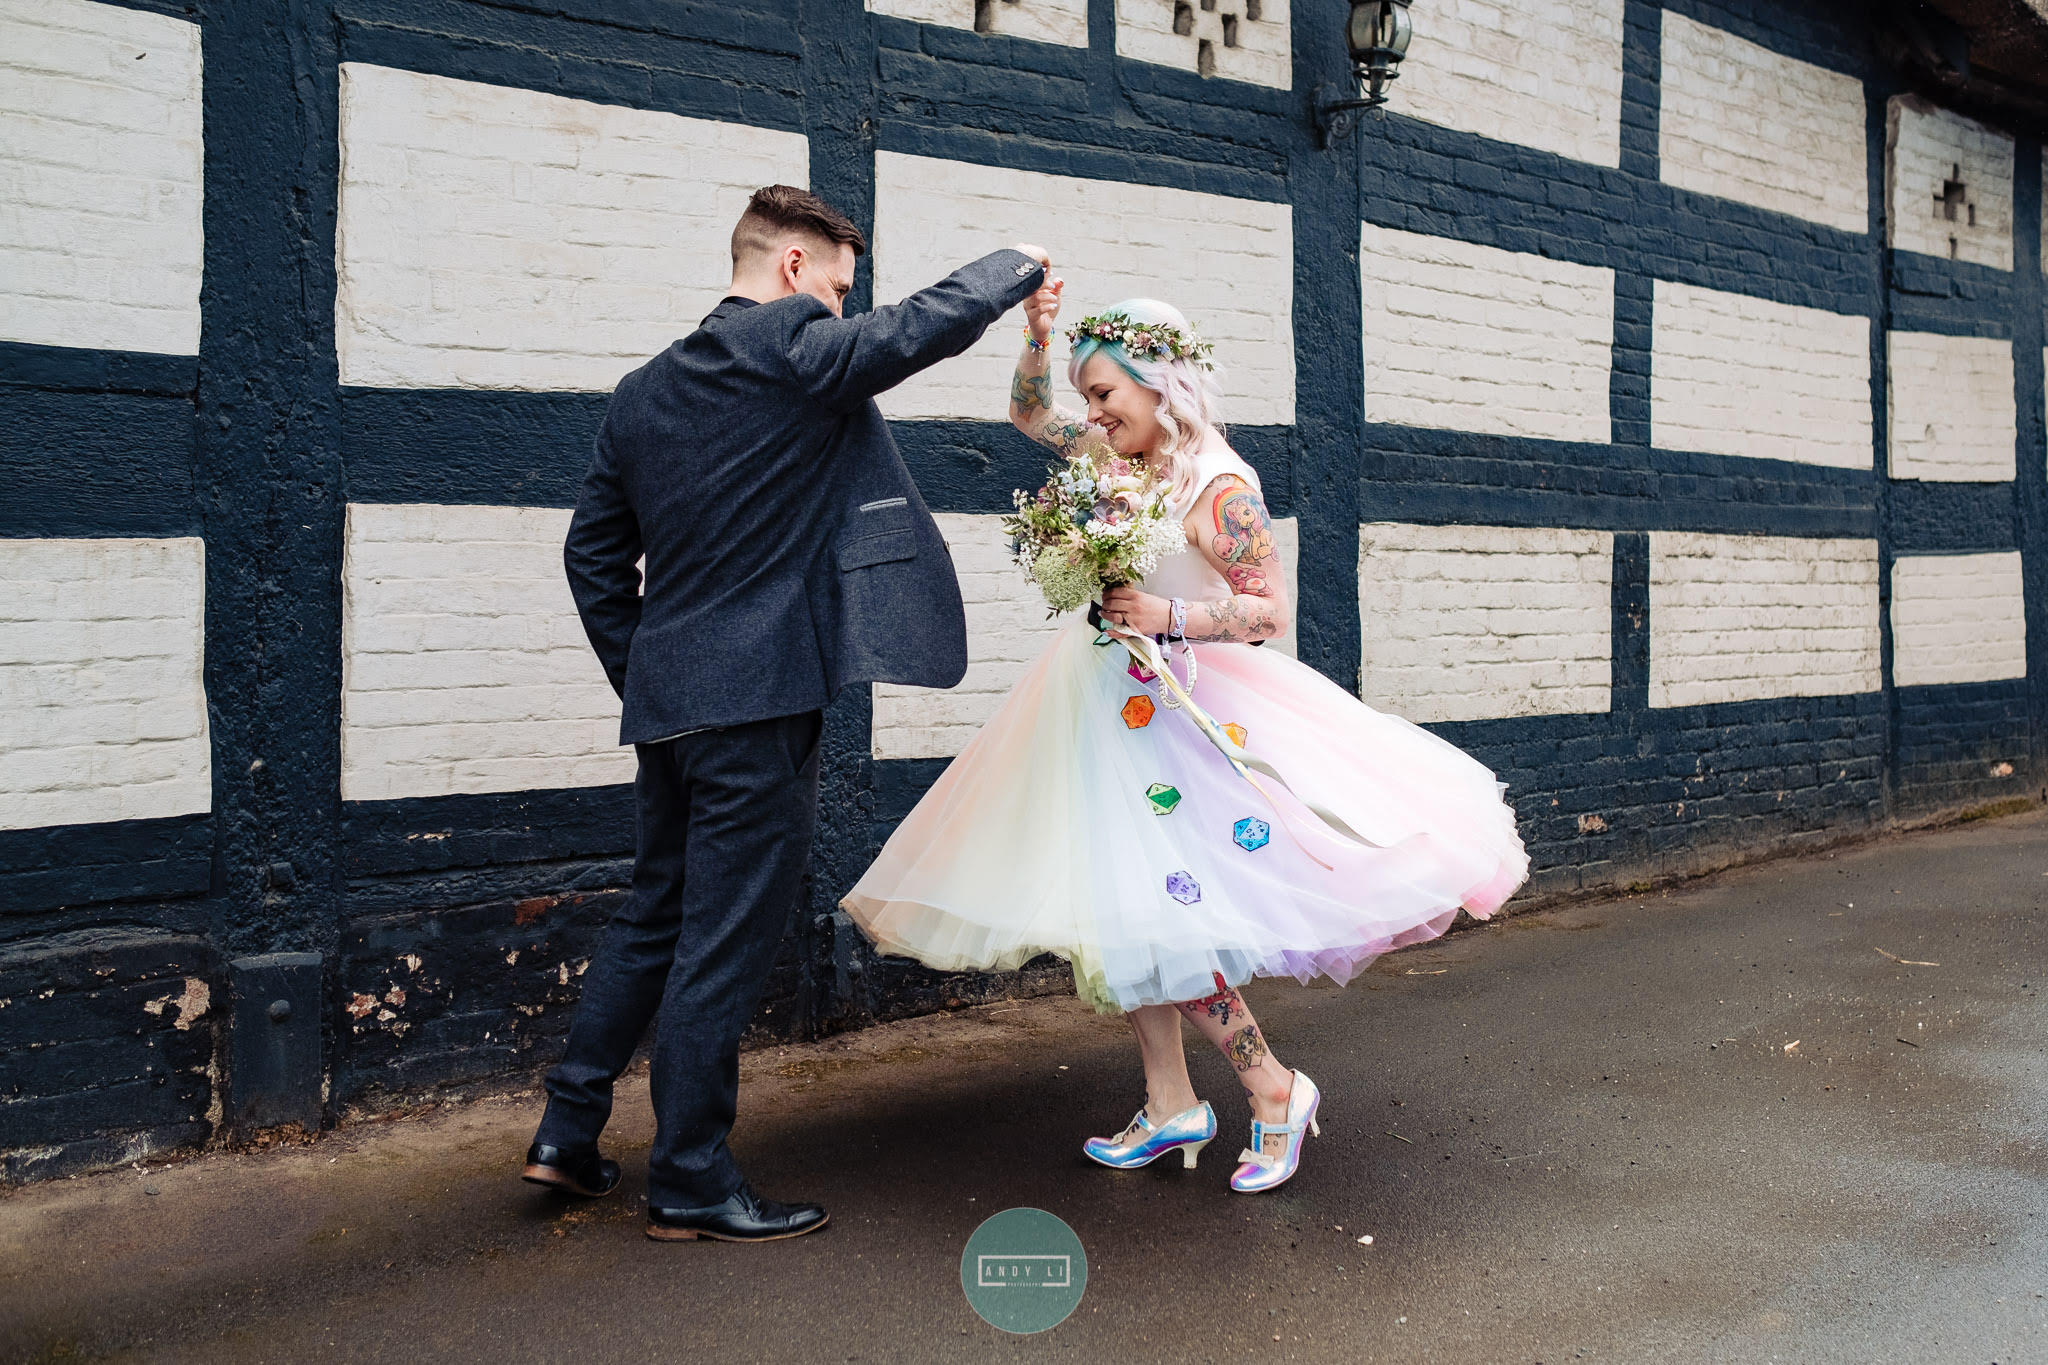 rainbow wedding dress by the little wedding shop - colourful wedding ideas with hand painted dice embellishments - dancing couple - quirky wedding dress ideas